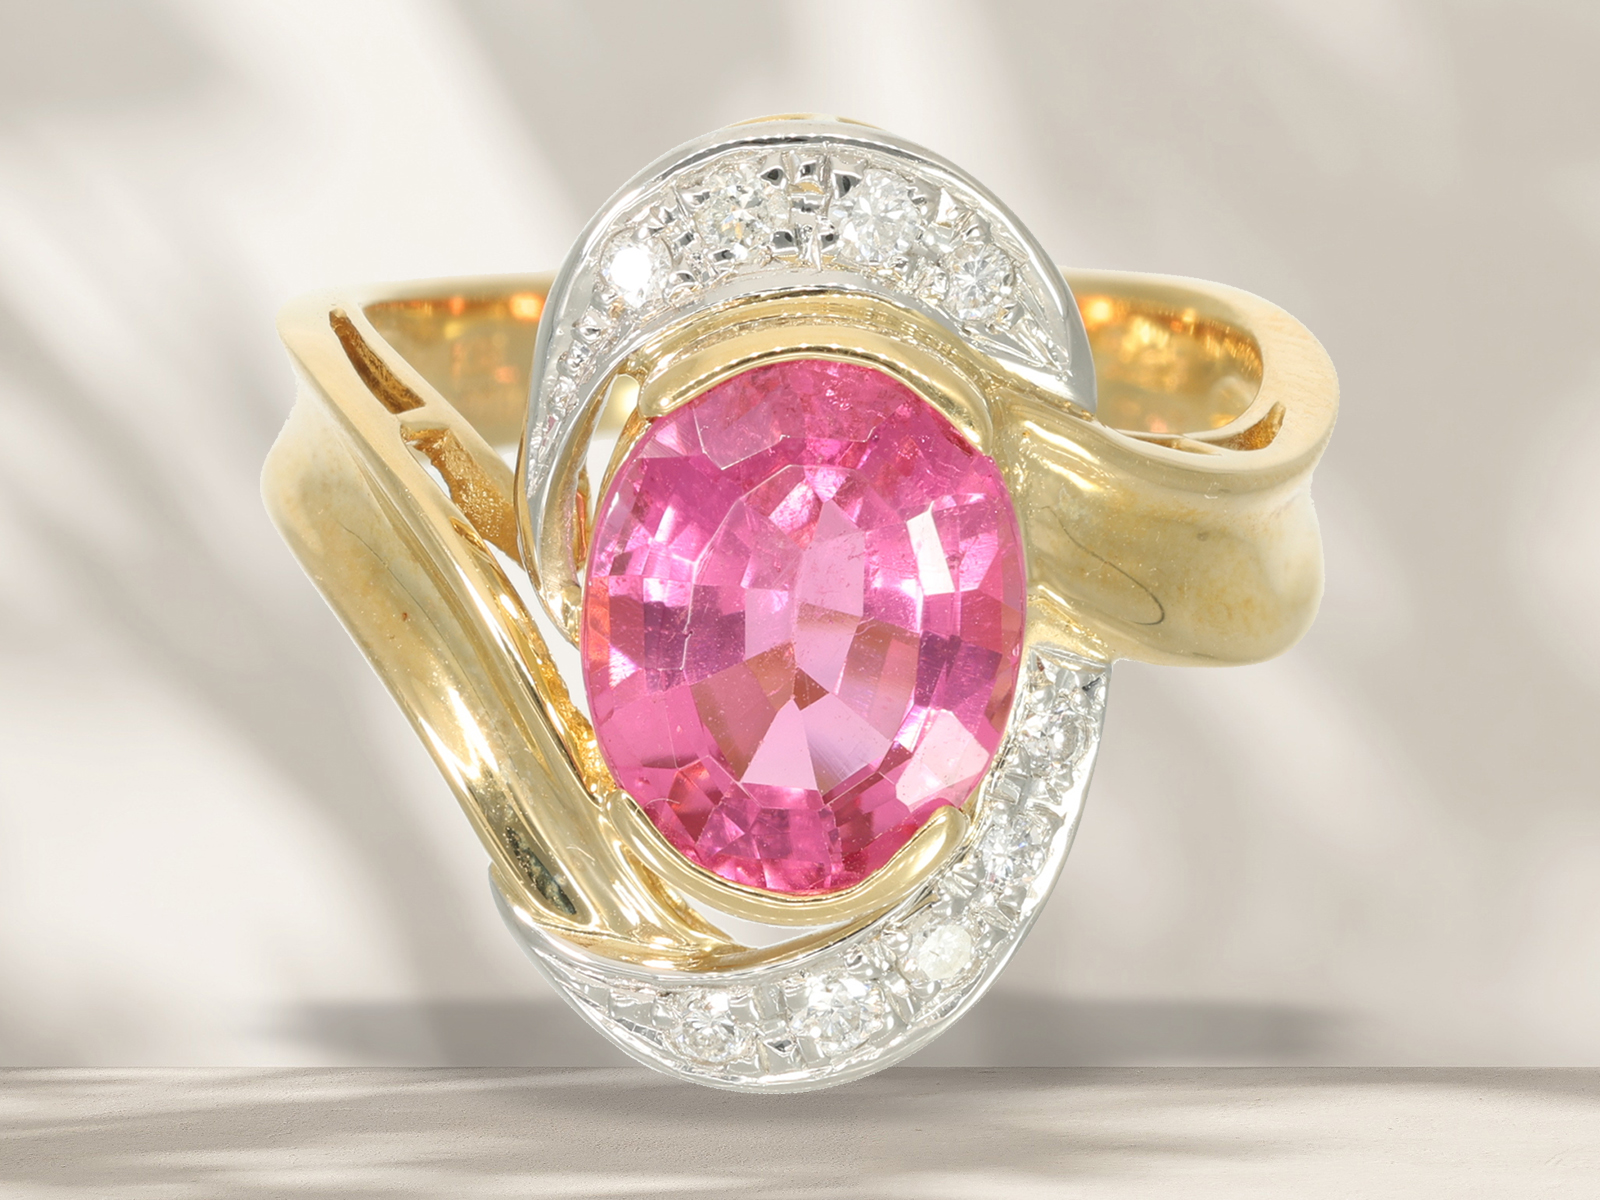 Ring: goldsmith ring with a rare "intense pink" tourmaline and brilliant-cut diamonds - Image 3 of 5